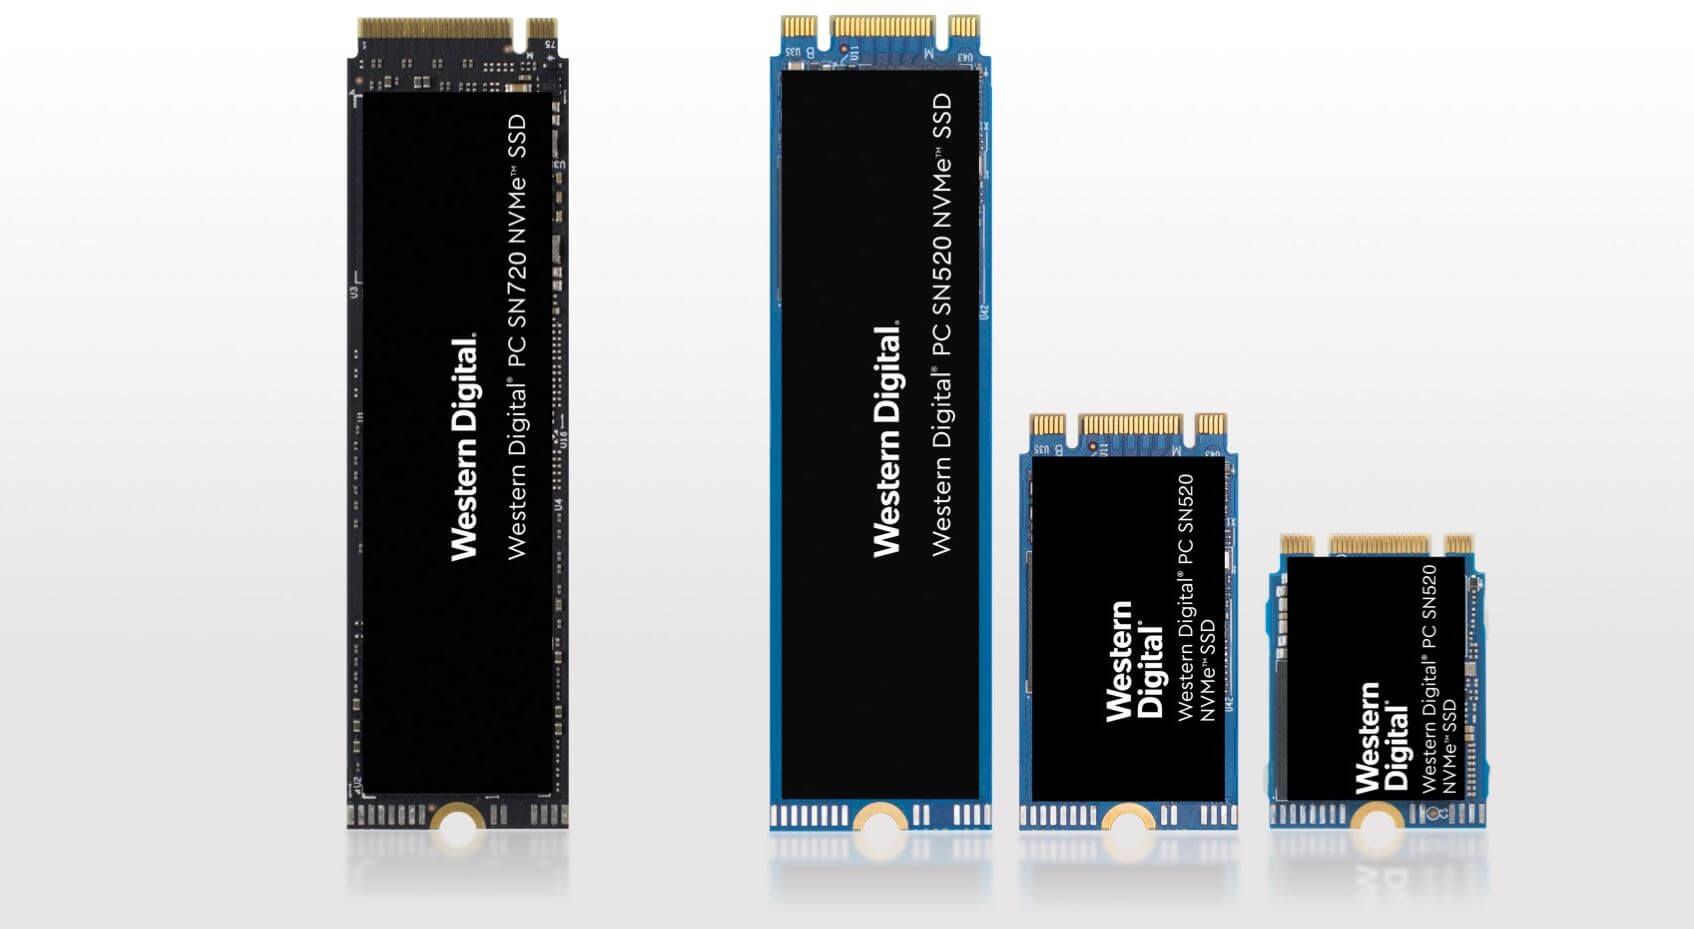 Western Digital launches NVMe SSDs for IoT and Fast Data applications